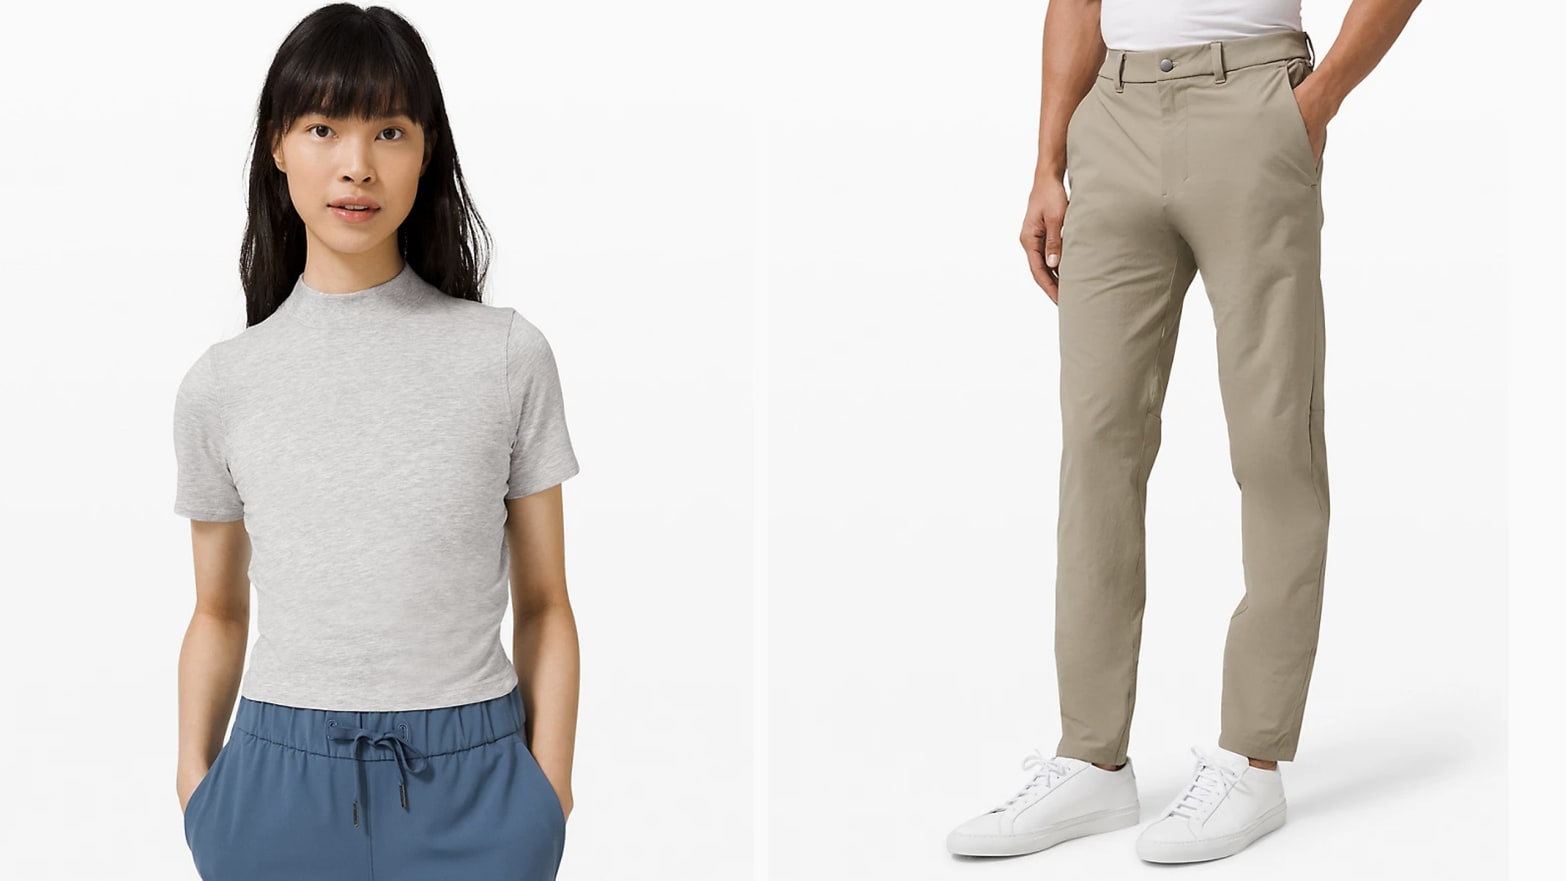 Lululemon's We Made Too Much sale has great workout gear deals for men,  women 